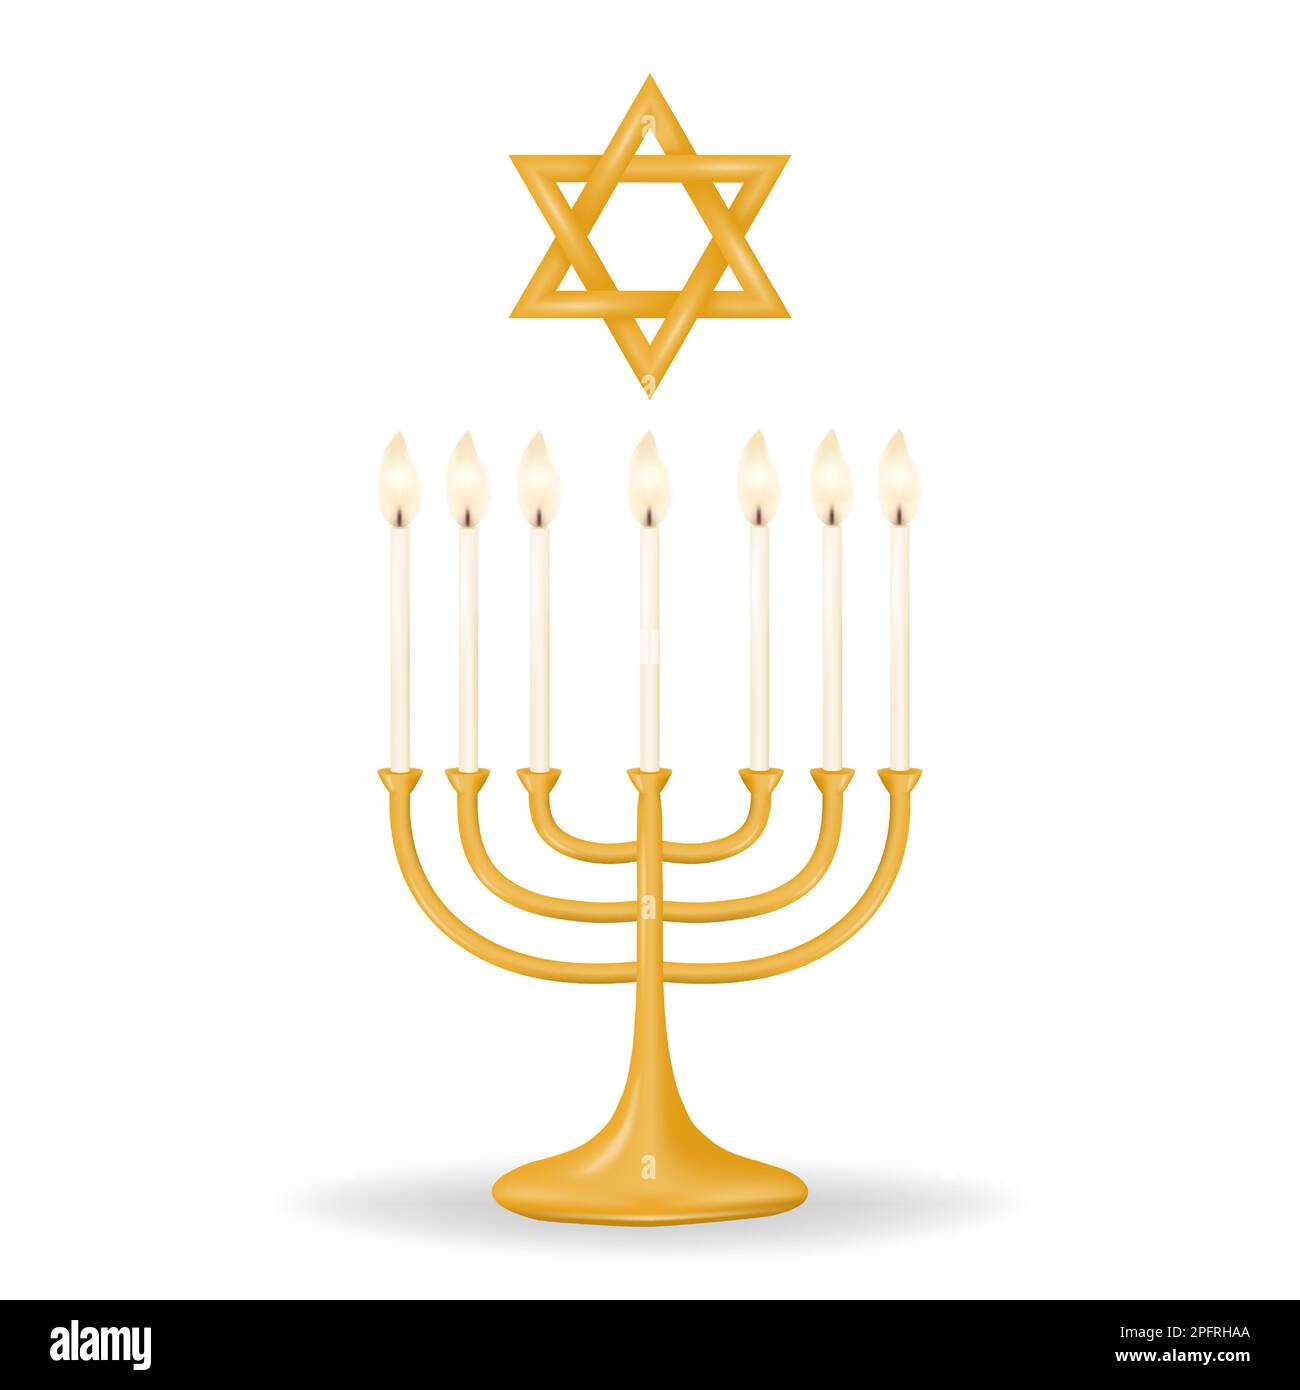 Celebrate Passover with these iconic menorah and star of David symbols in gold. Menorah featuring seven candles, star of David in a gold color on a cl Stock Vector